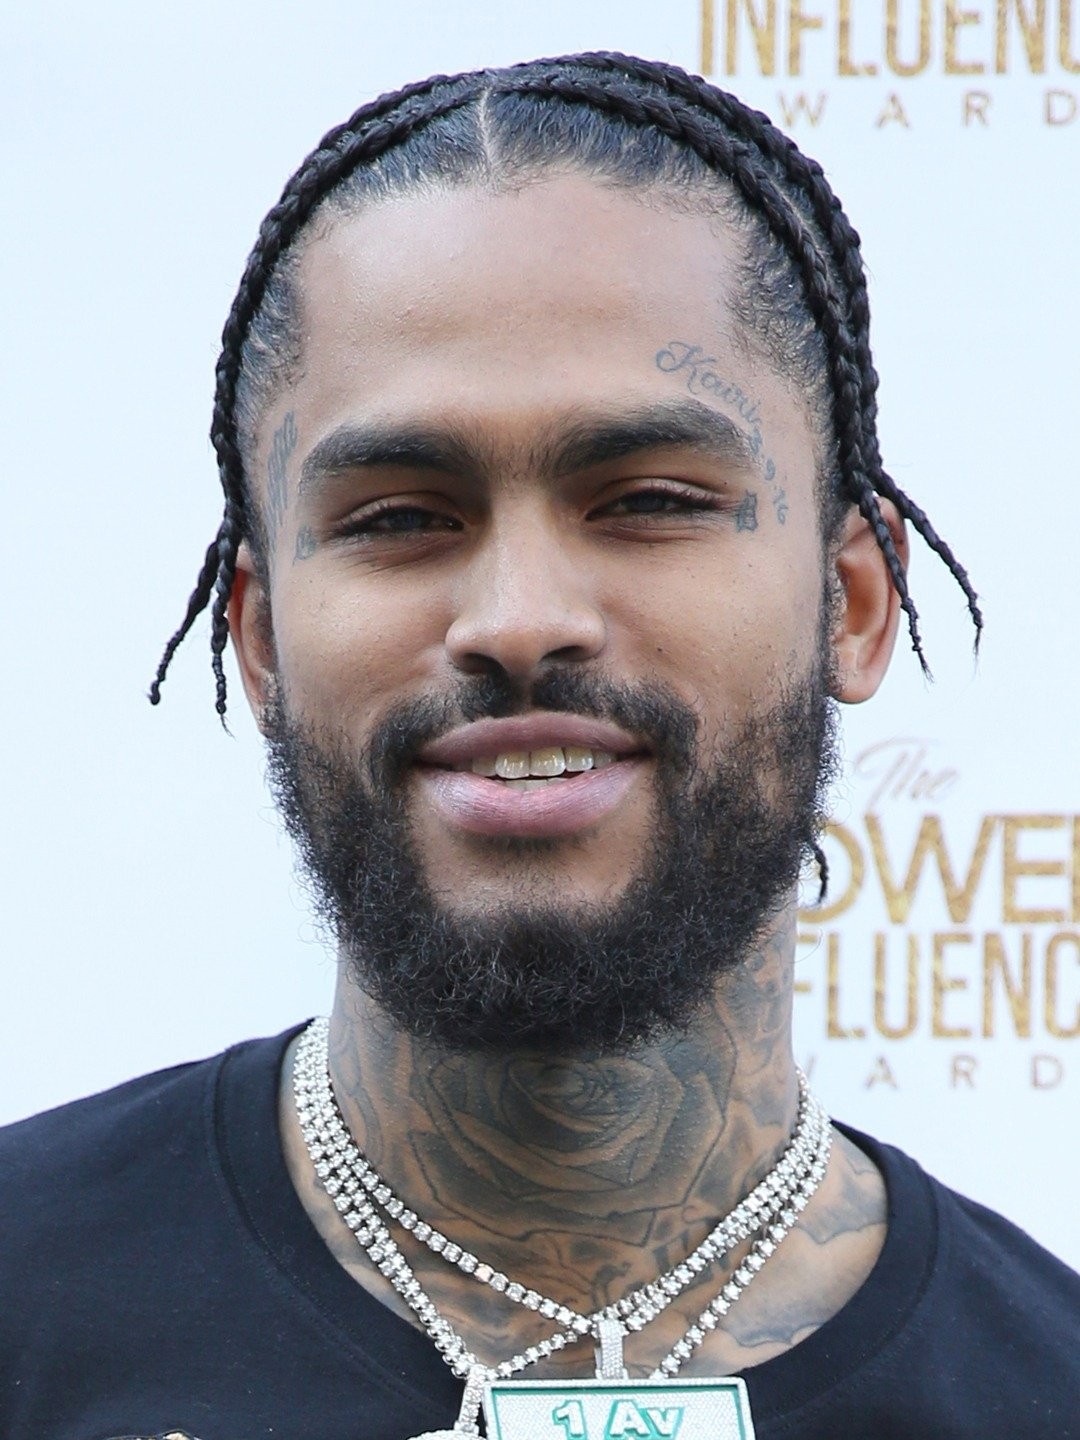 Share 137+ dave east tattoos